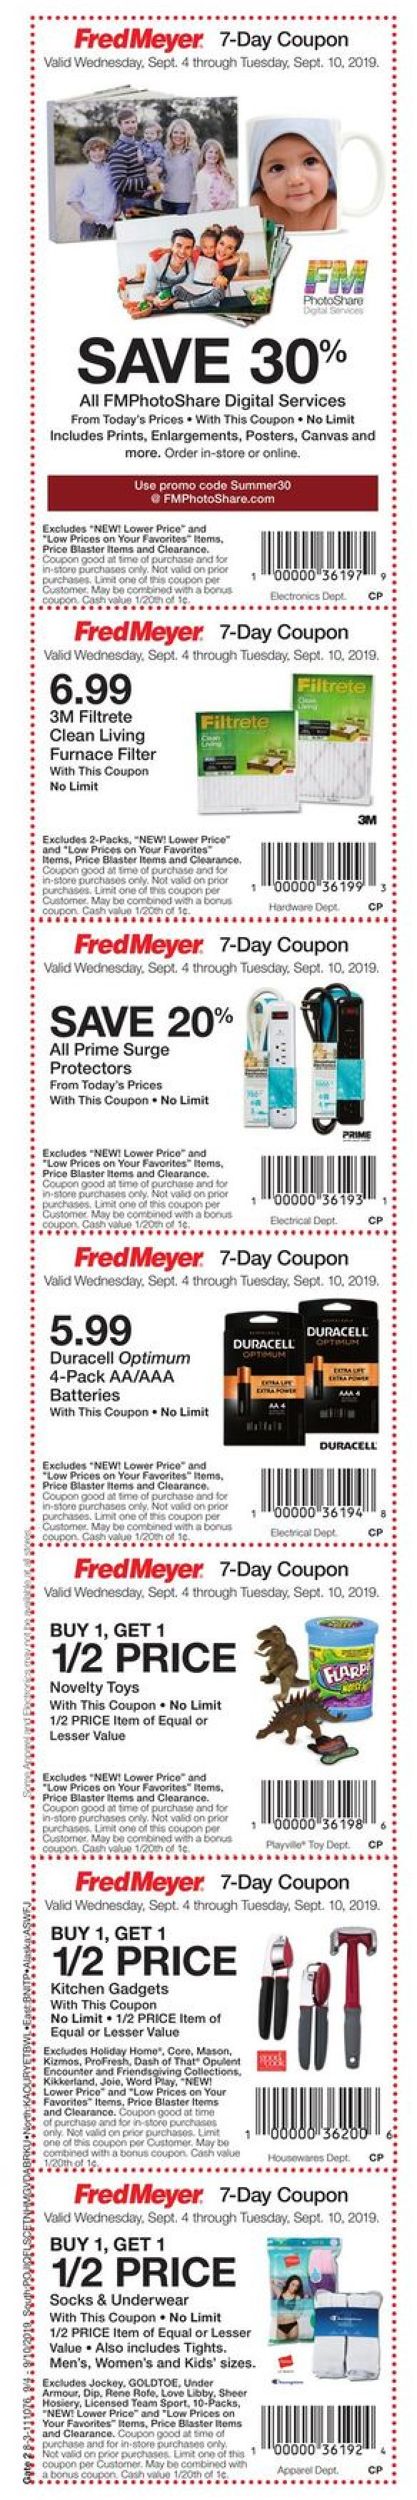 Fred Meyer Weekly Ad Circular - valid 09/04-09/10/2019 (Page 7)